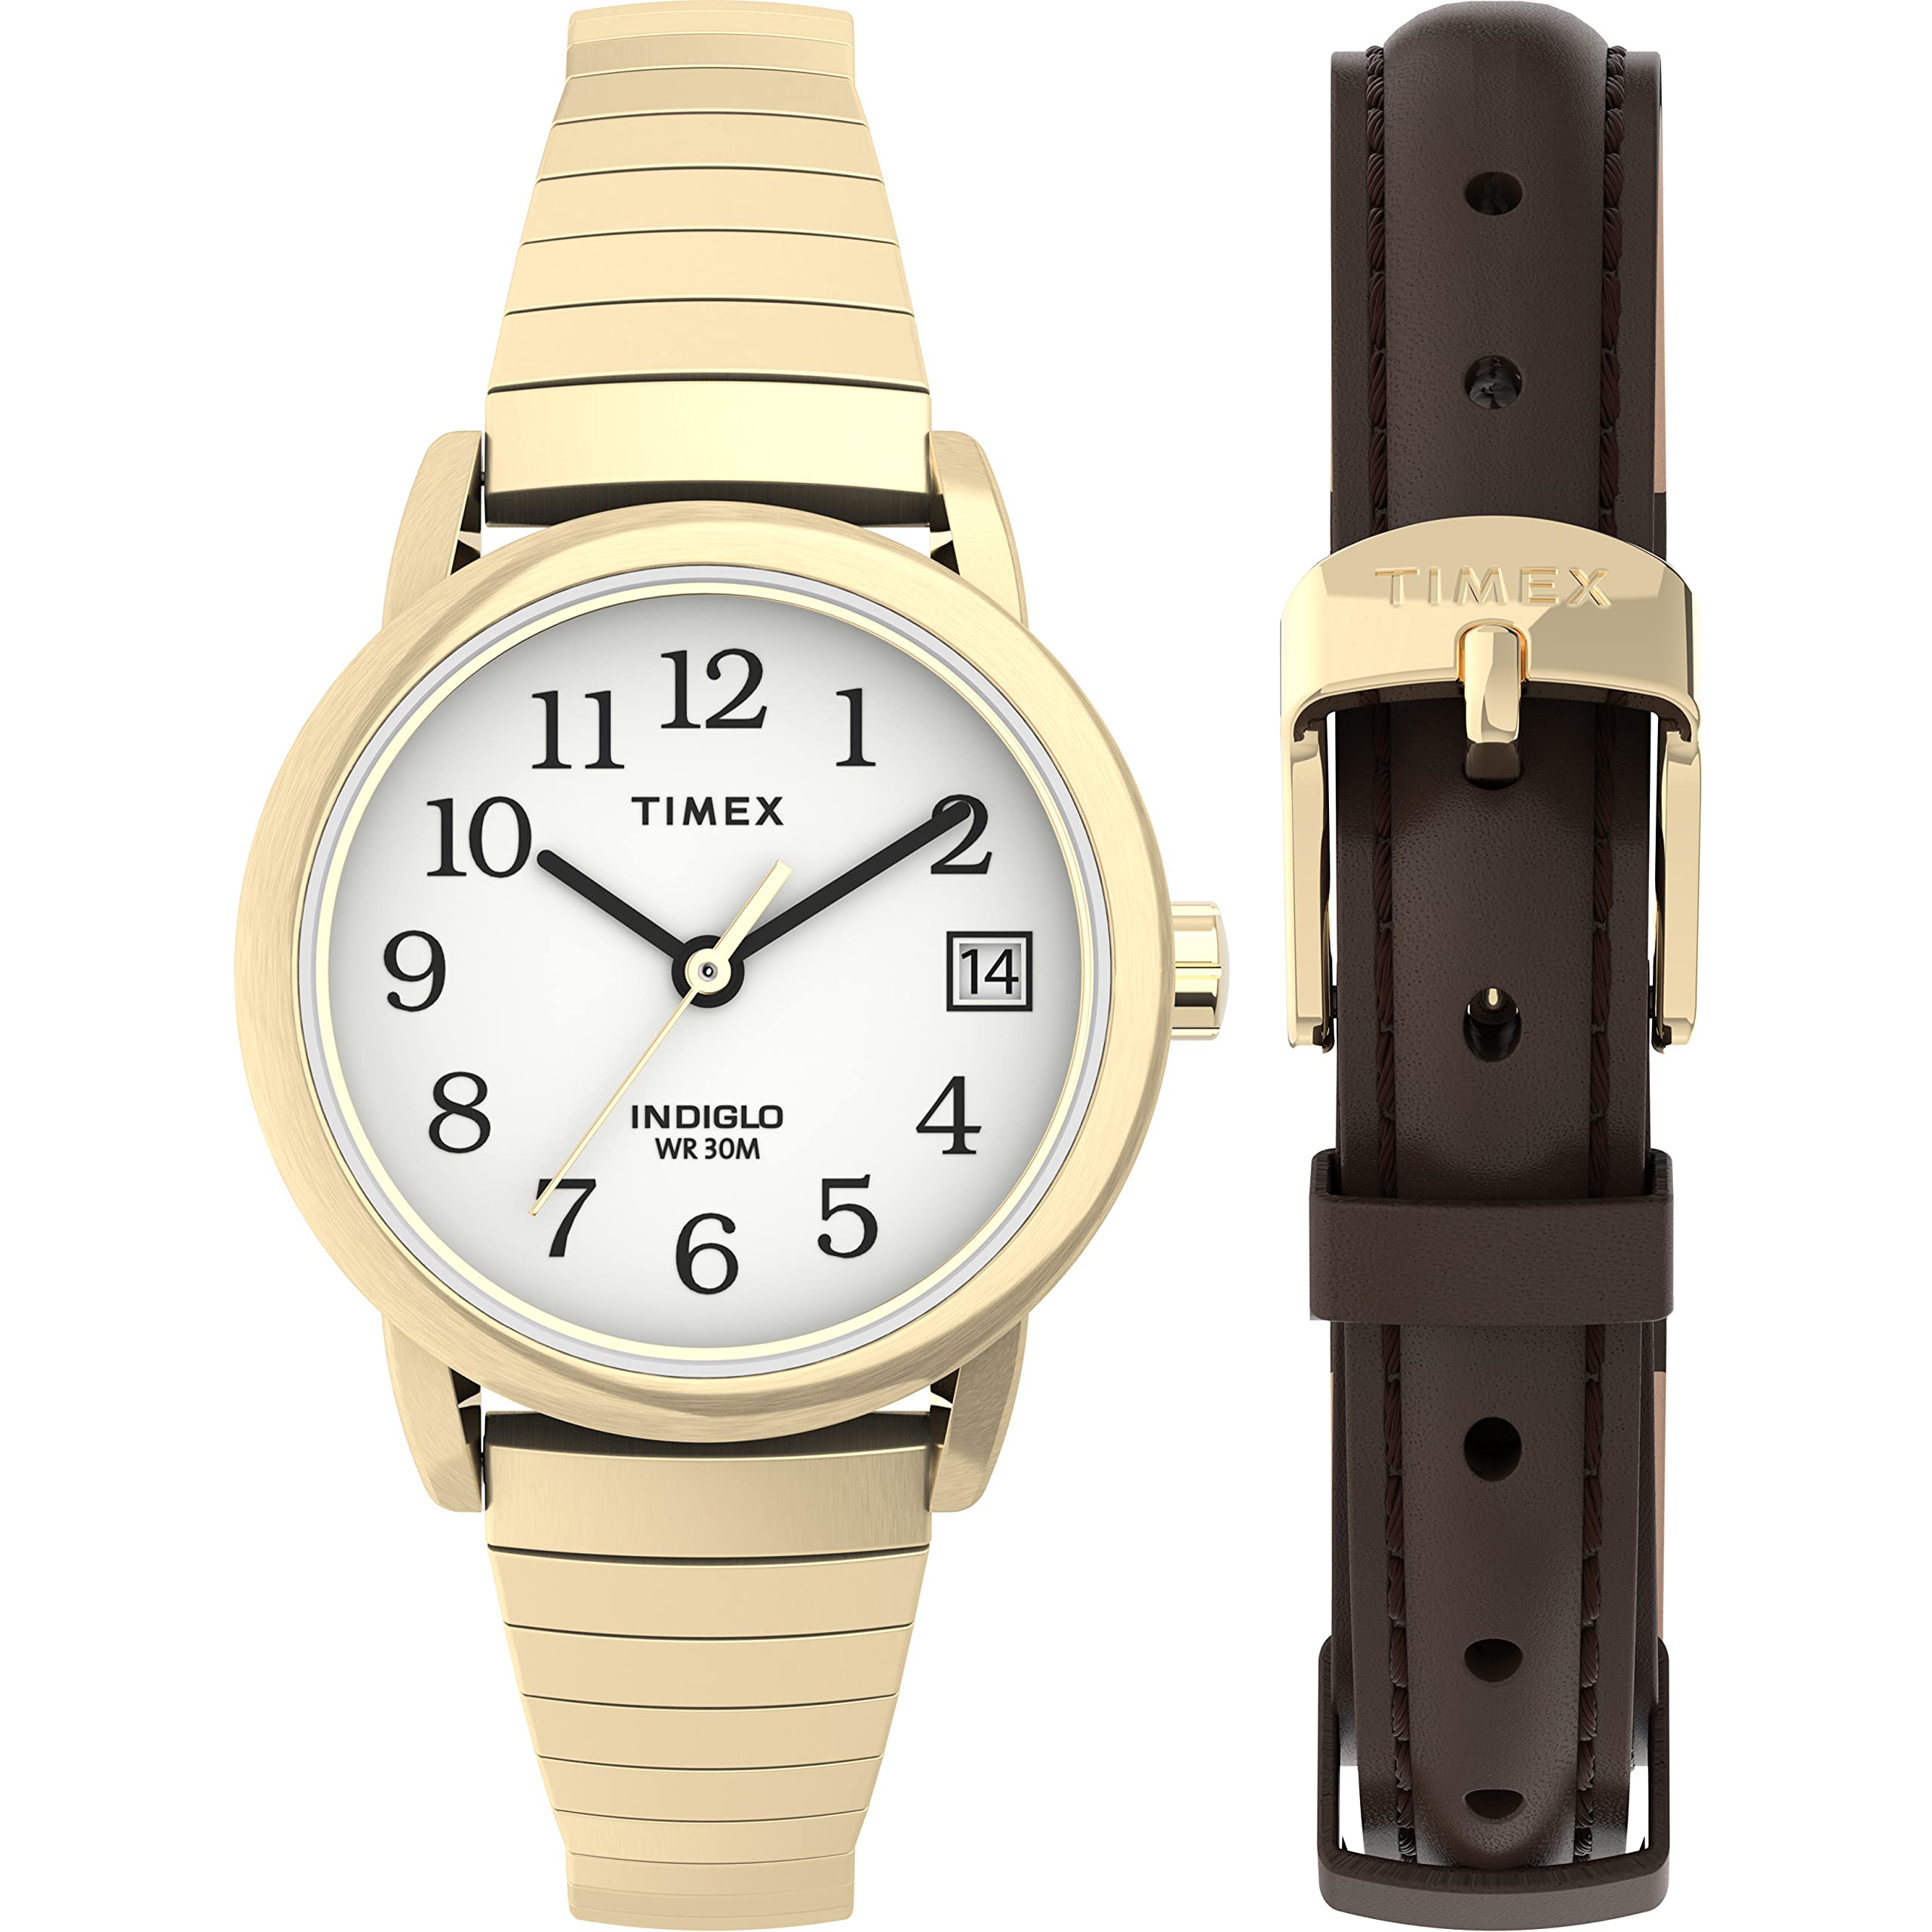 Timex Women's Easy Reader 25mm Watch Box Set – Gold-Tone Case White Dial with Tapered Expansion Band + Brown Leather Strap